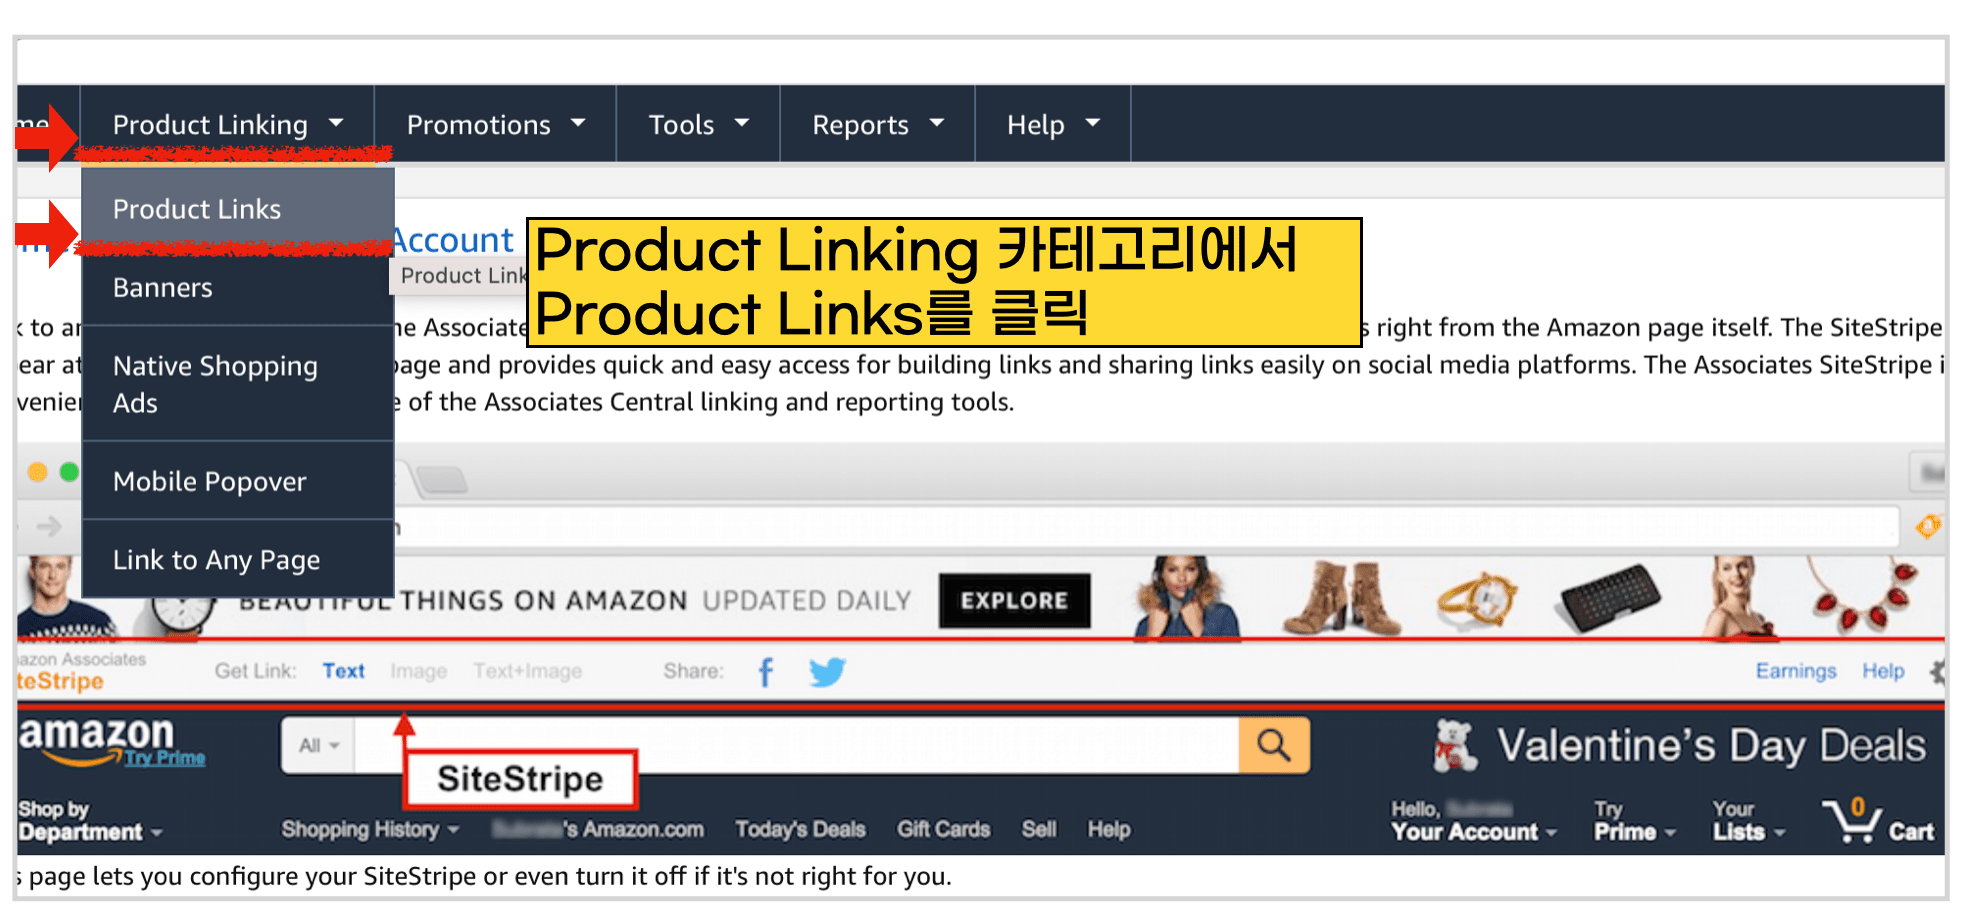 product linking and product link 가는 방법